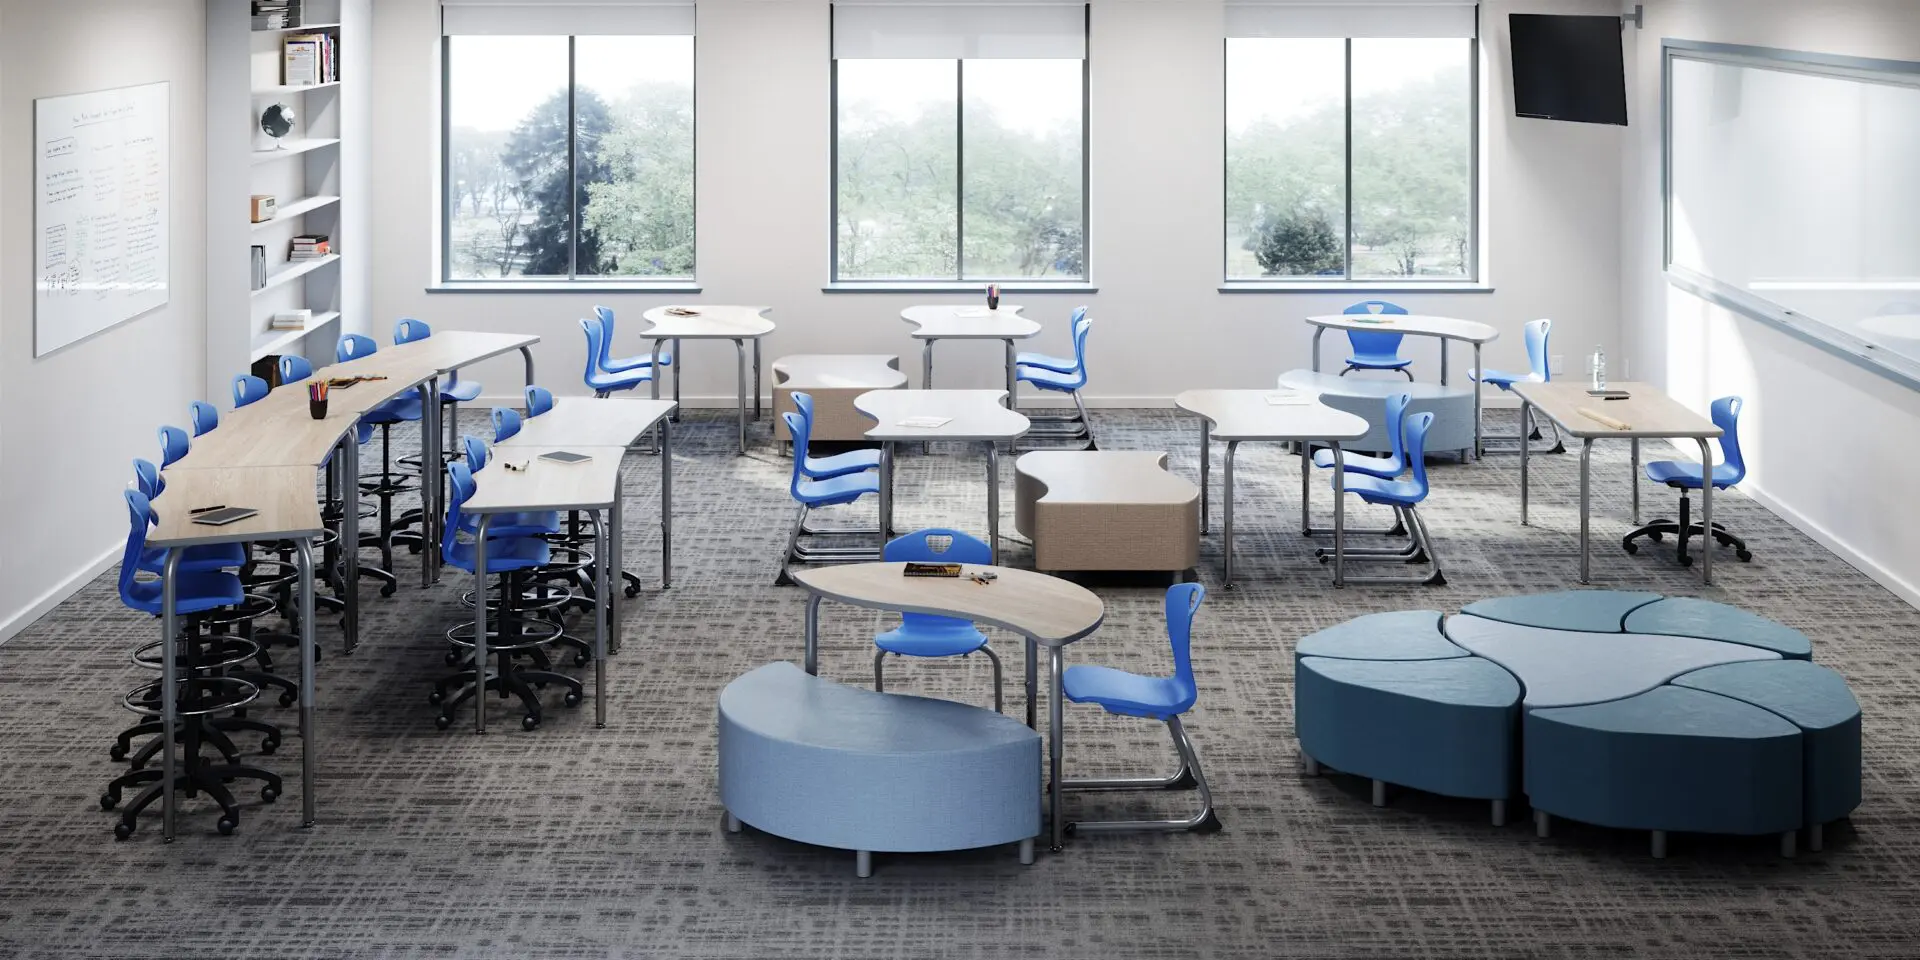 A classroom with many tables and chairs in it